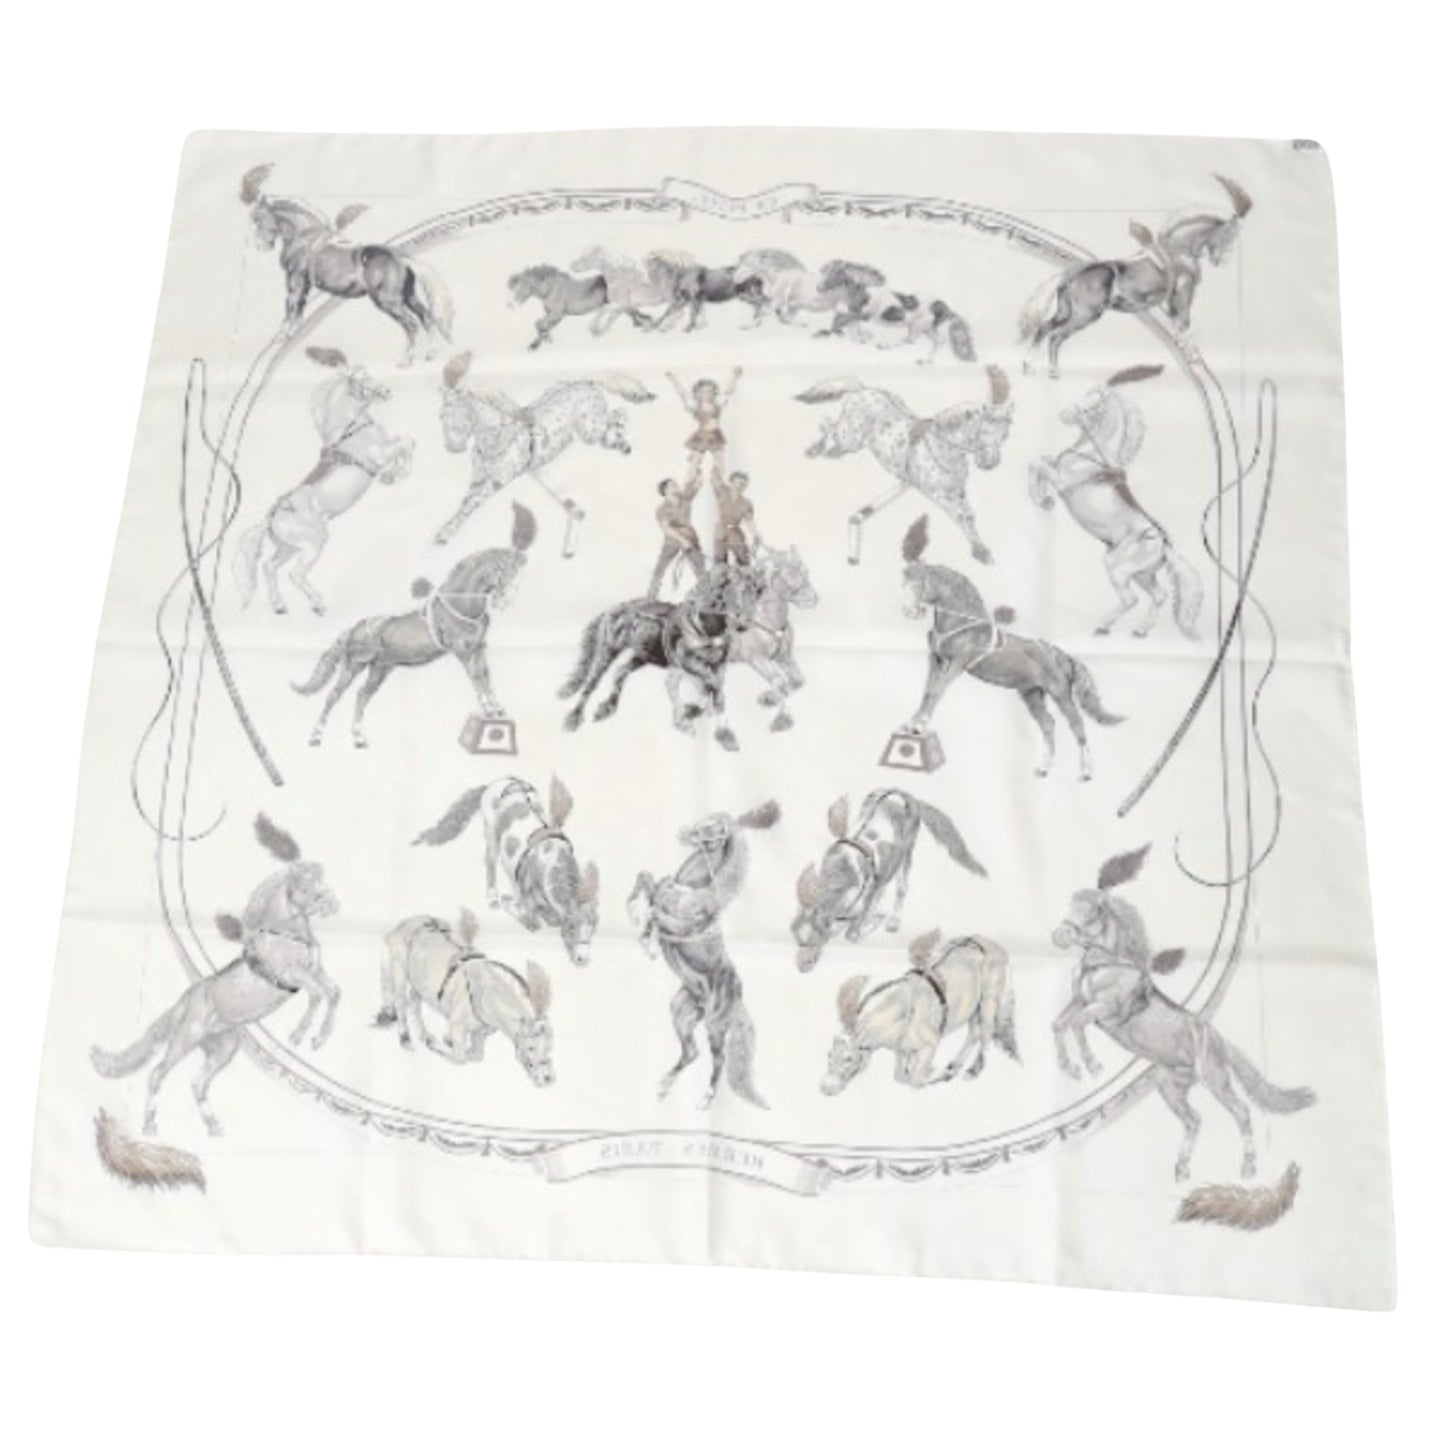 Hermes Women's Luxurious Iconic Silk Scarf in Multicolour